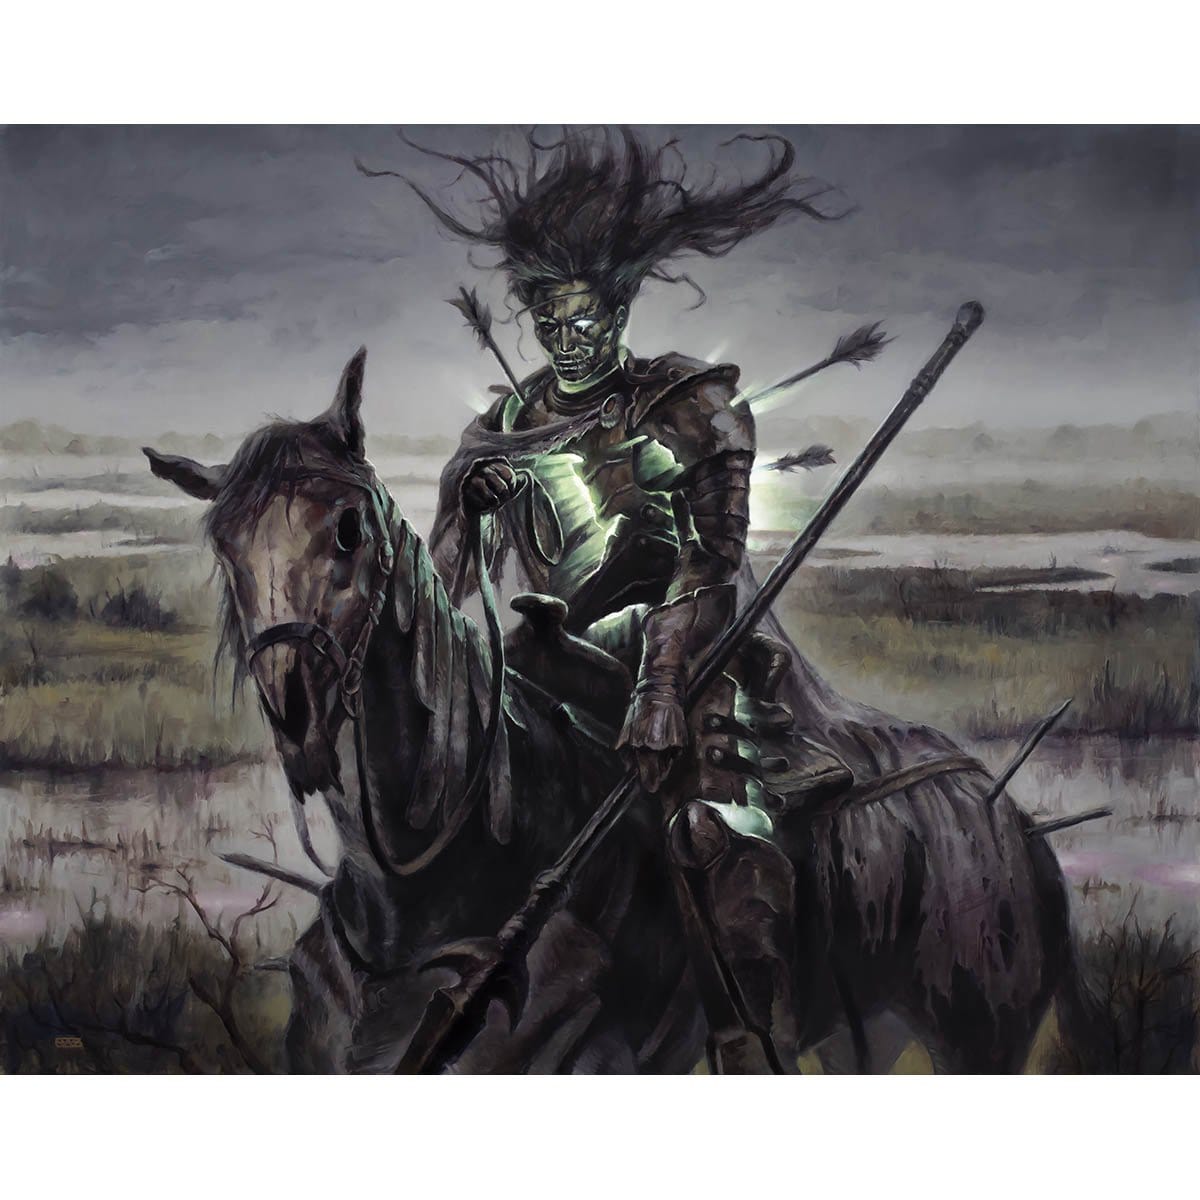 Murderous Rider Print - Print - Original Magic Art - Accessories for Magic the Gathering and other card games